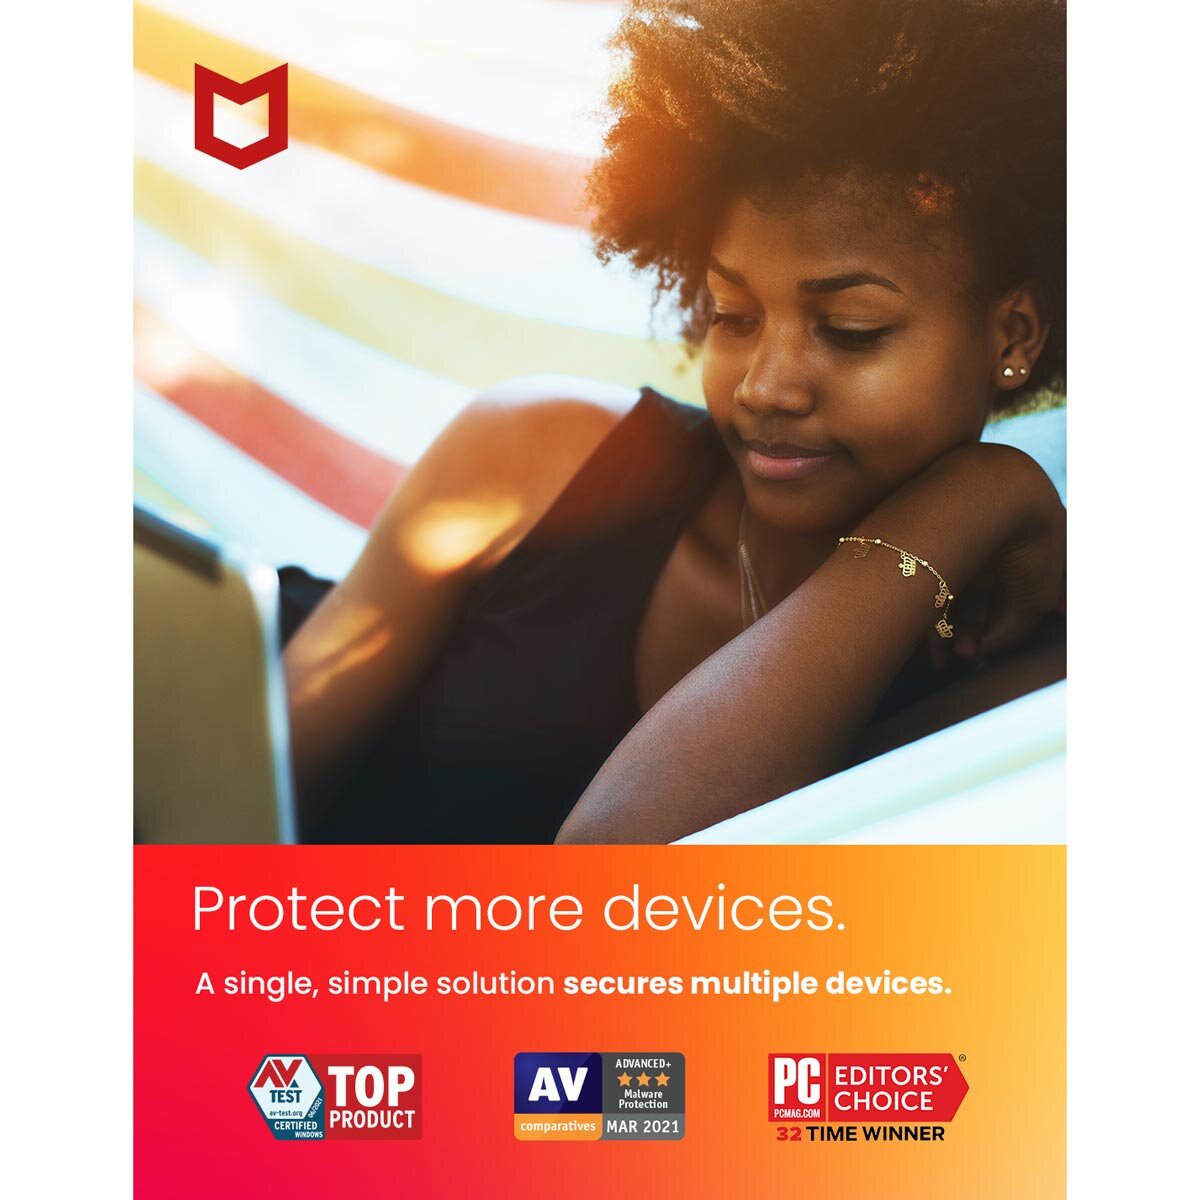 McAfee Internet Security 3 Device, 1 Year